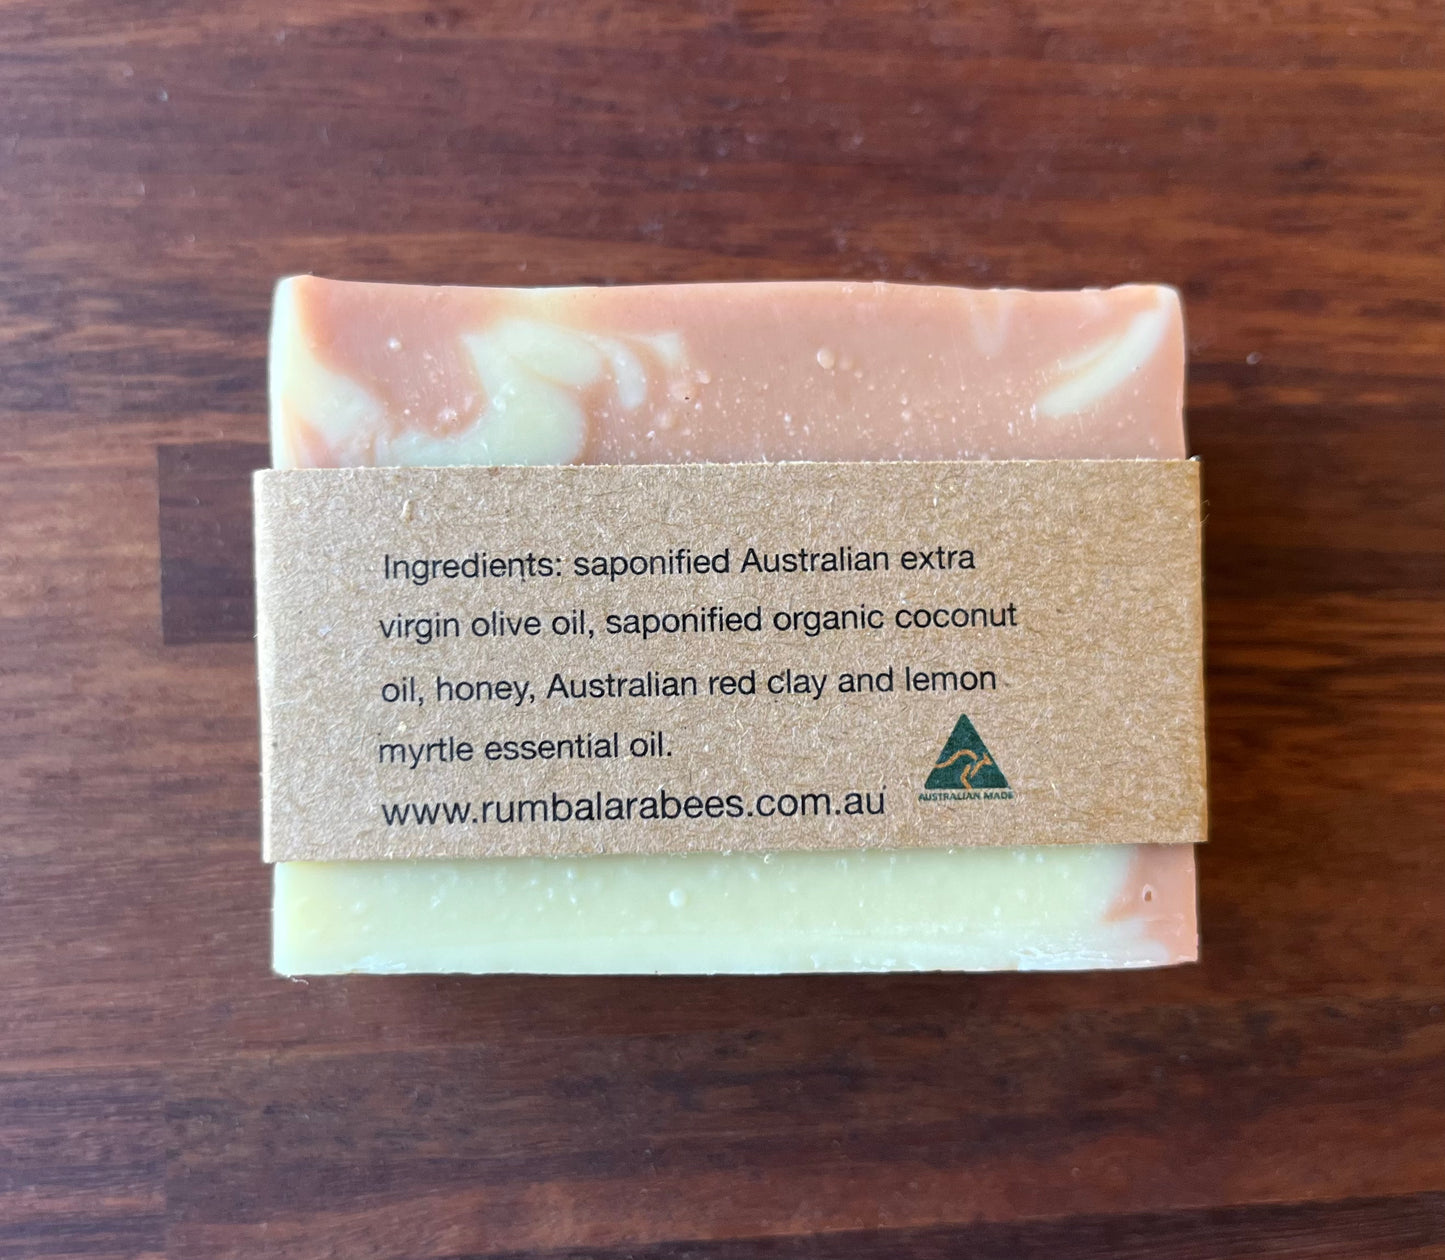 Red clay, lemon myrtle and honey soap 100g